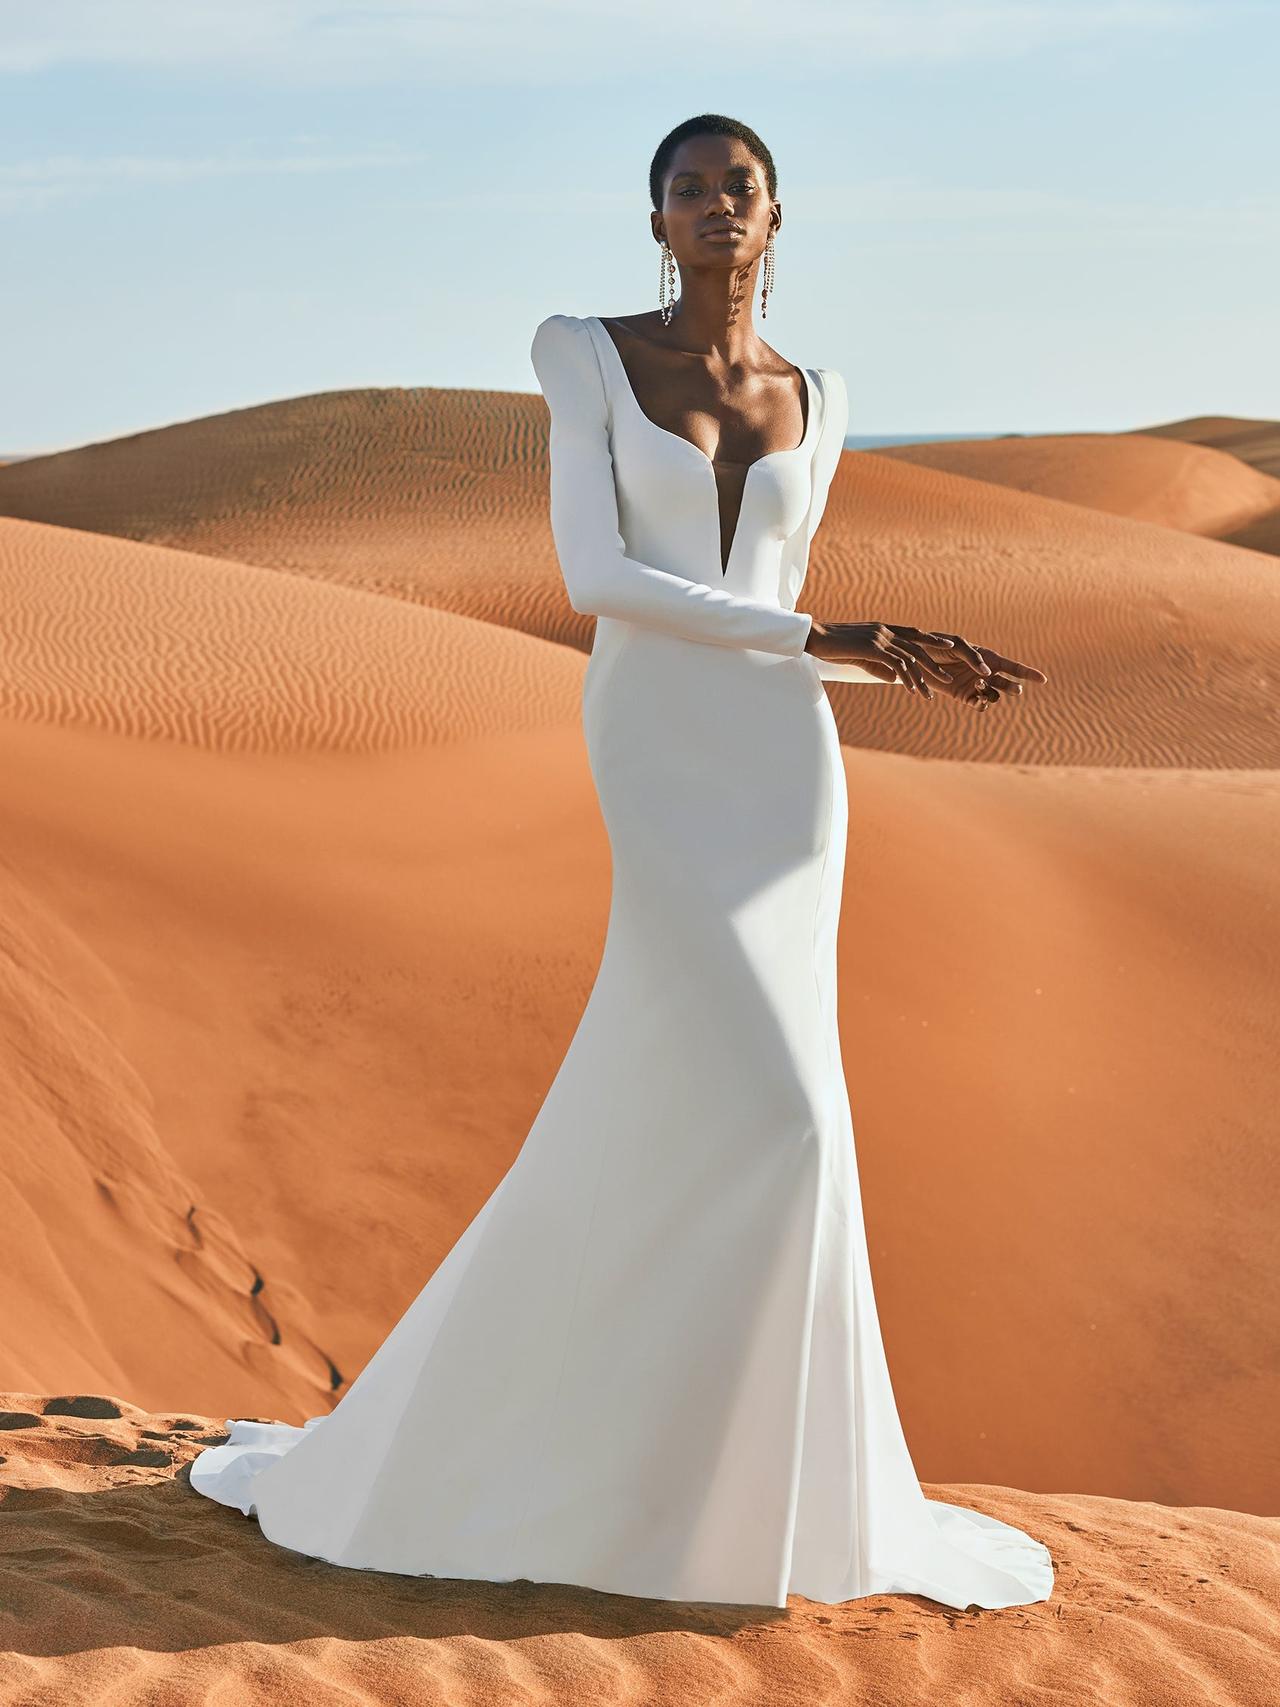 Sexy Wedding Dresses: 35 Racy Designs For Daring -